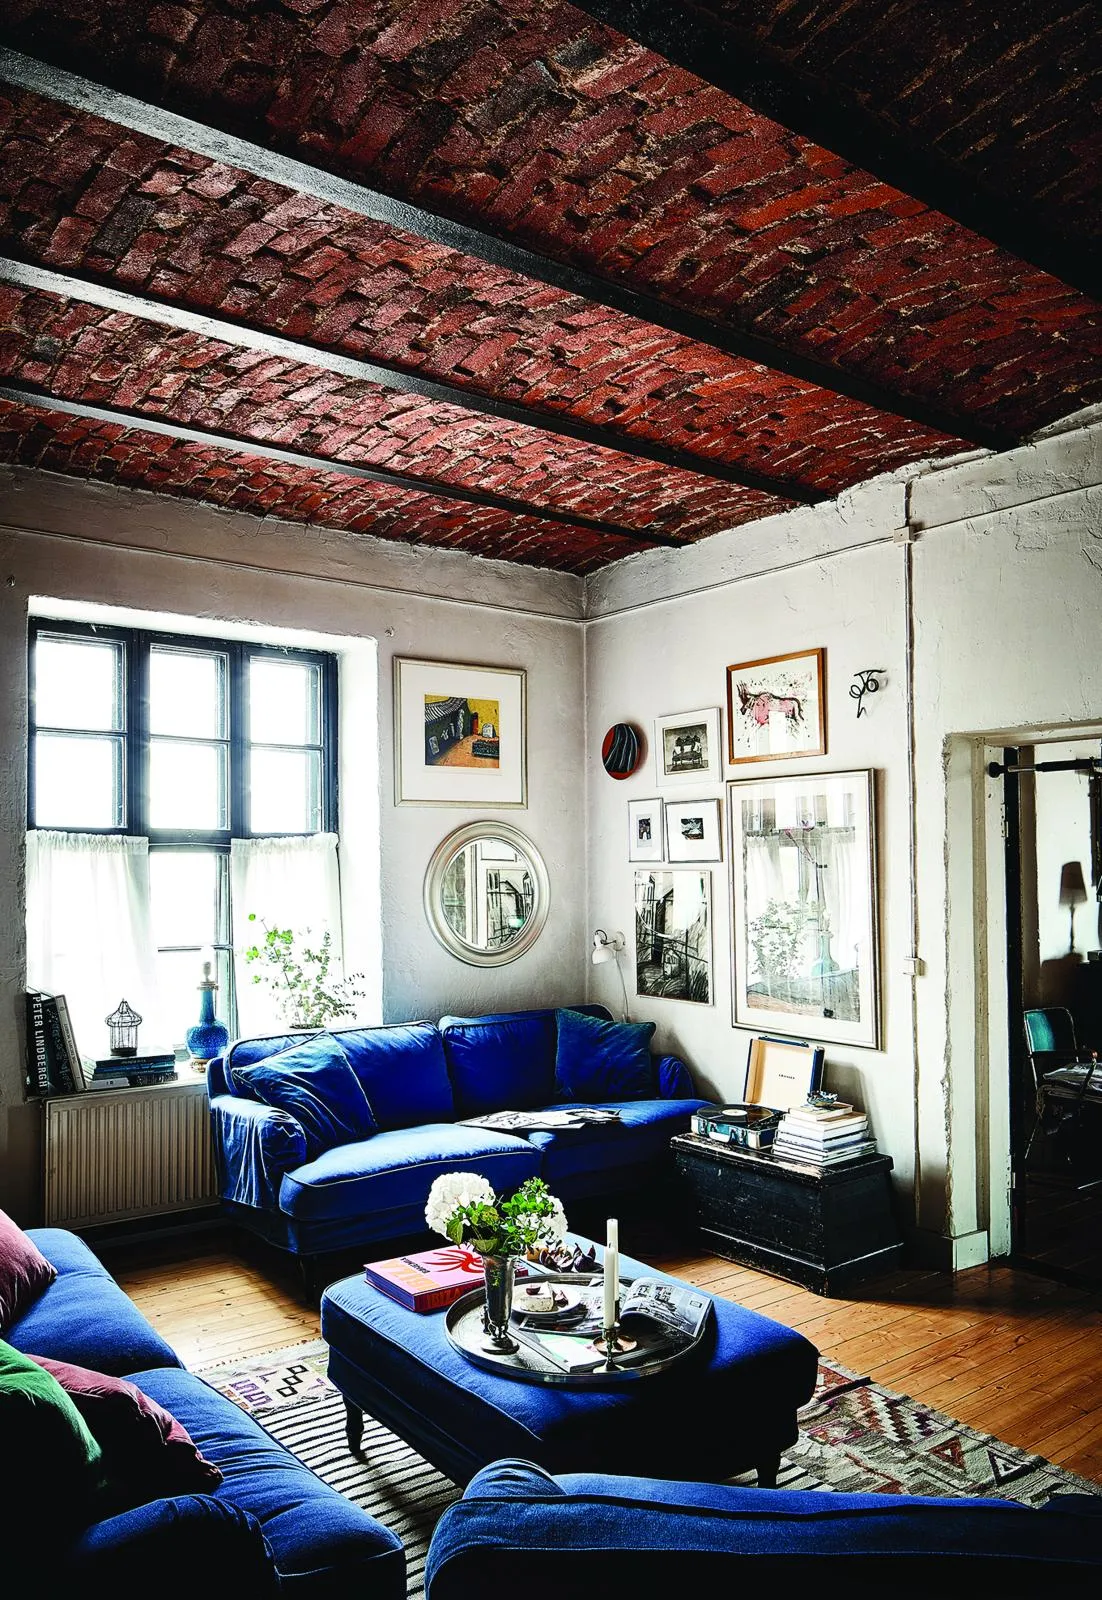 Finnish former factory home: blue sofa in the living room.